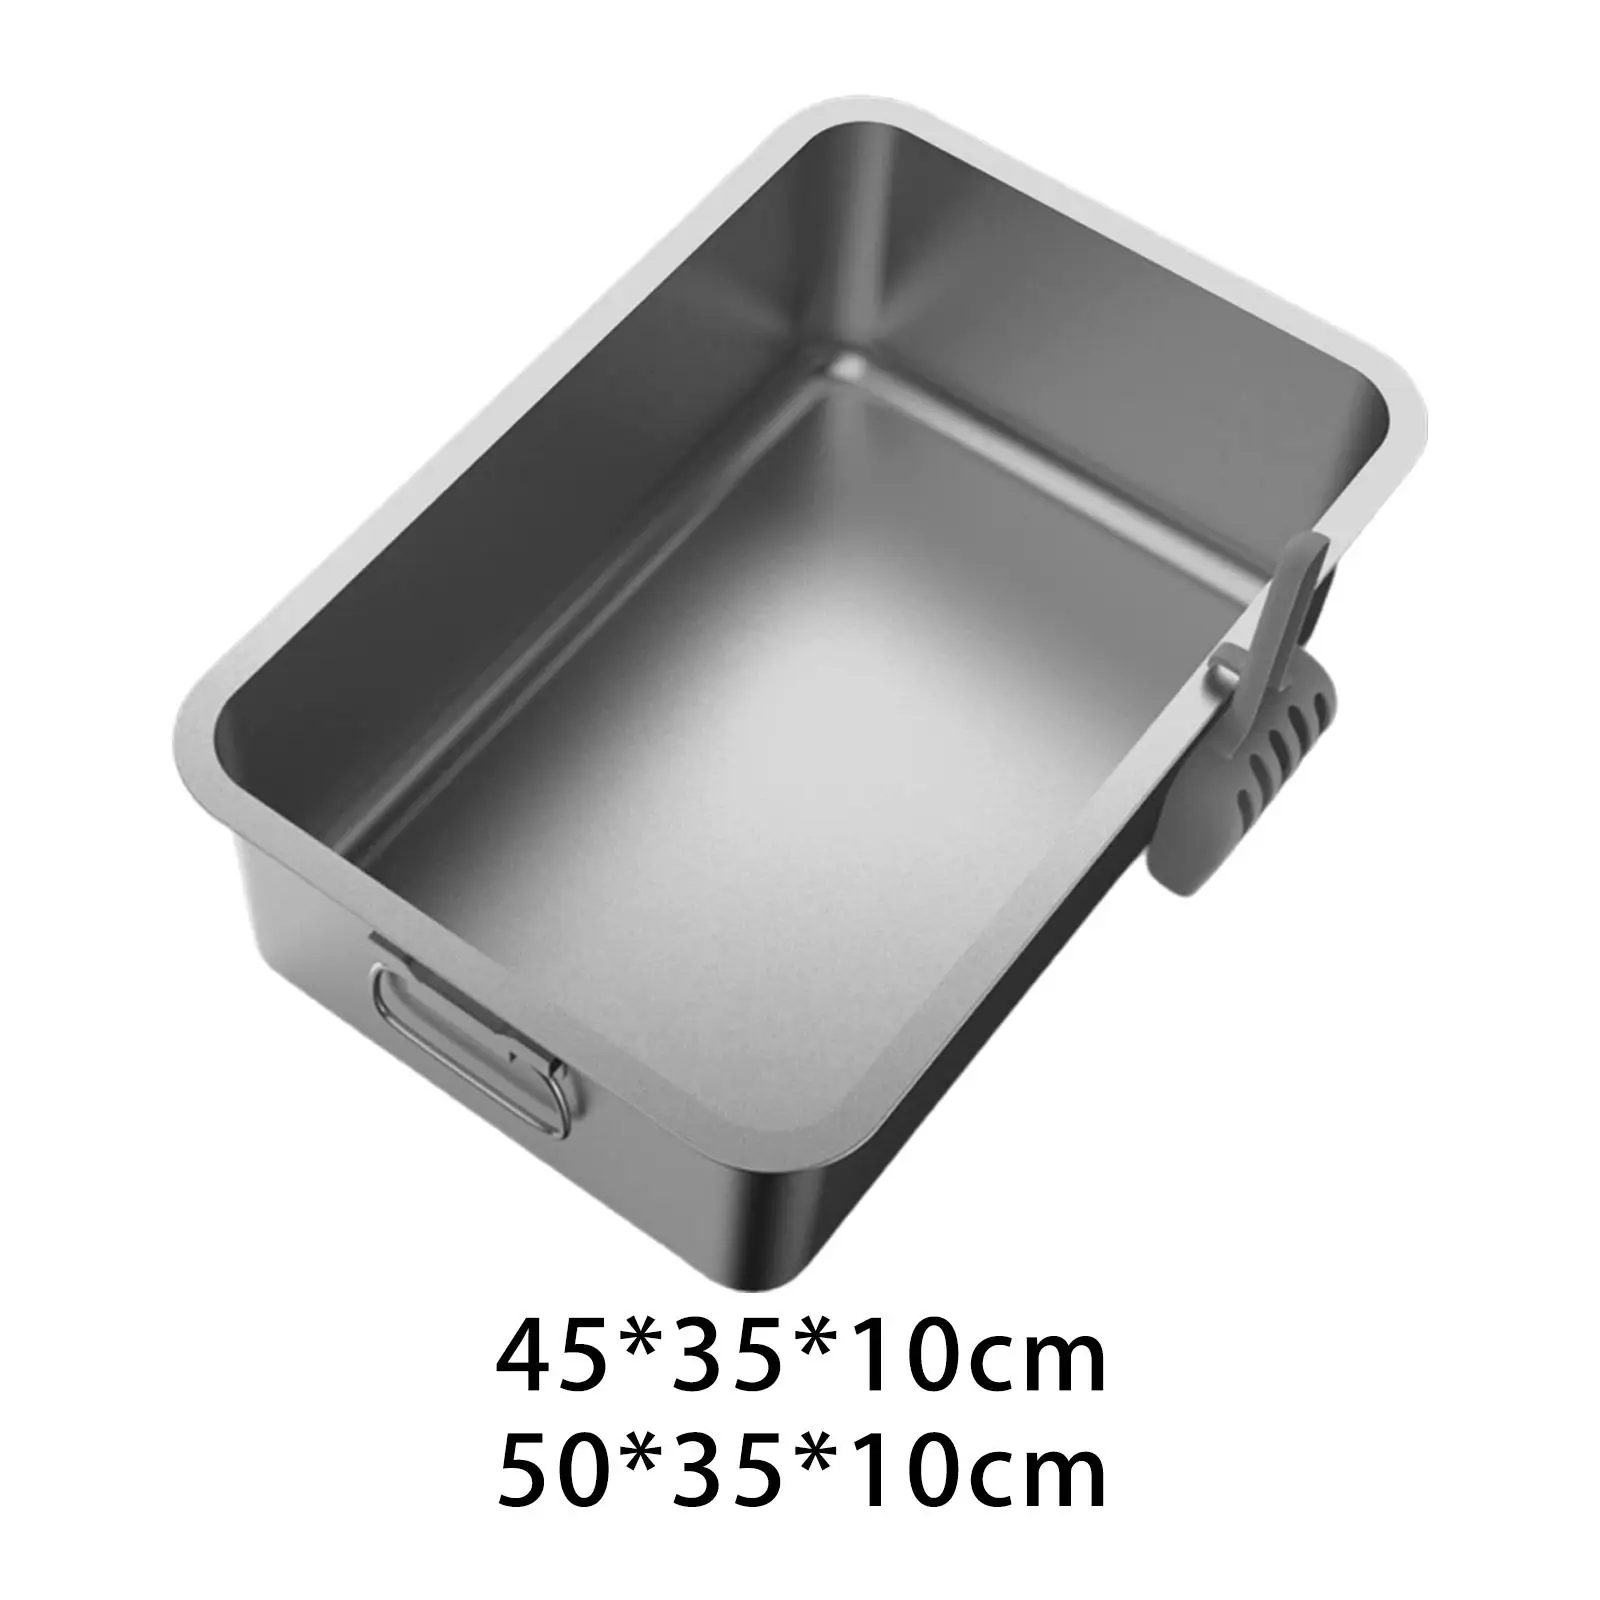 Rabbit Litter Box Holder Made of Stainless Steel, Anti-rust, with Side Carrying